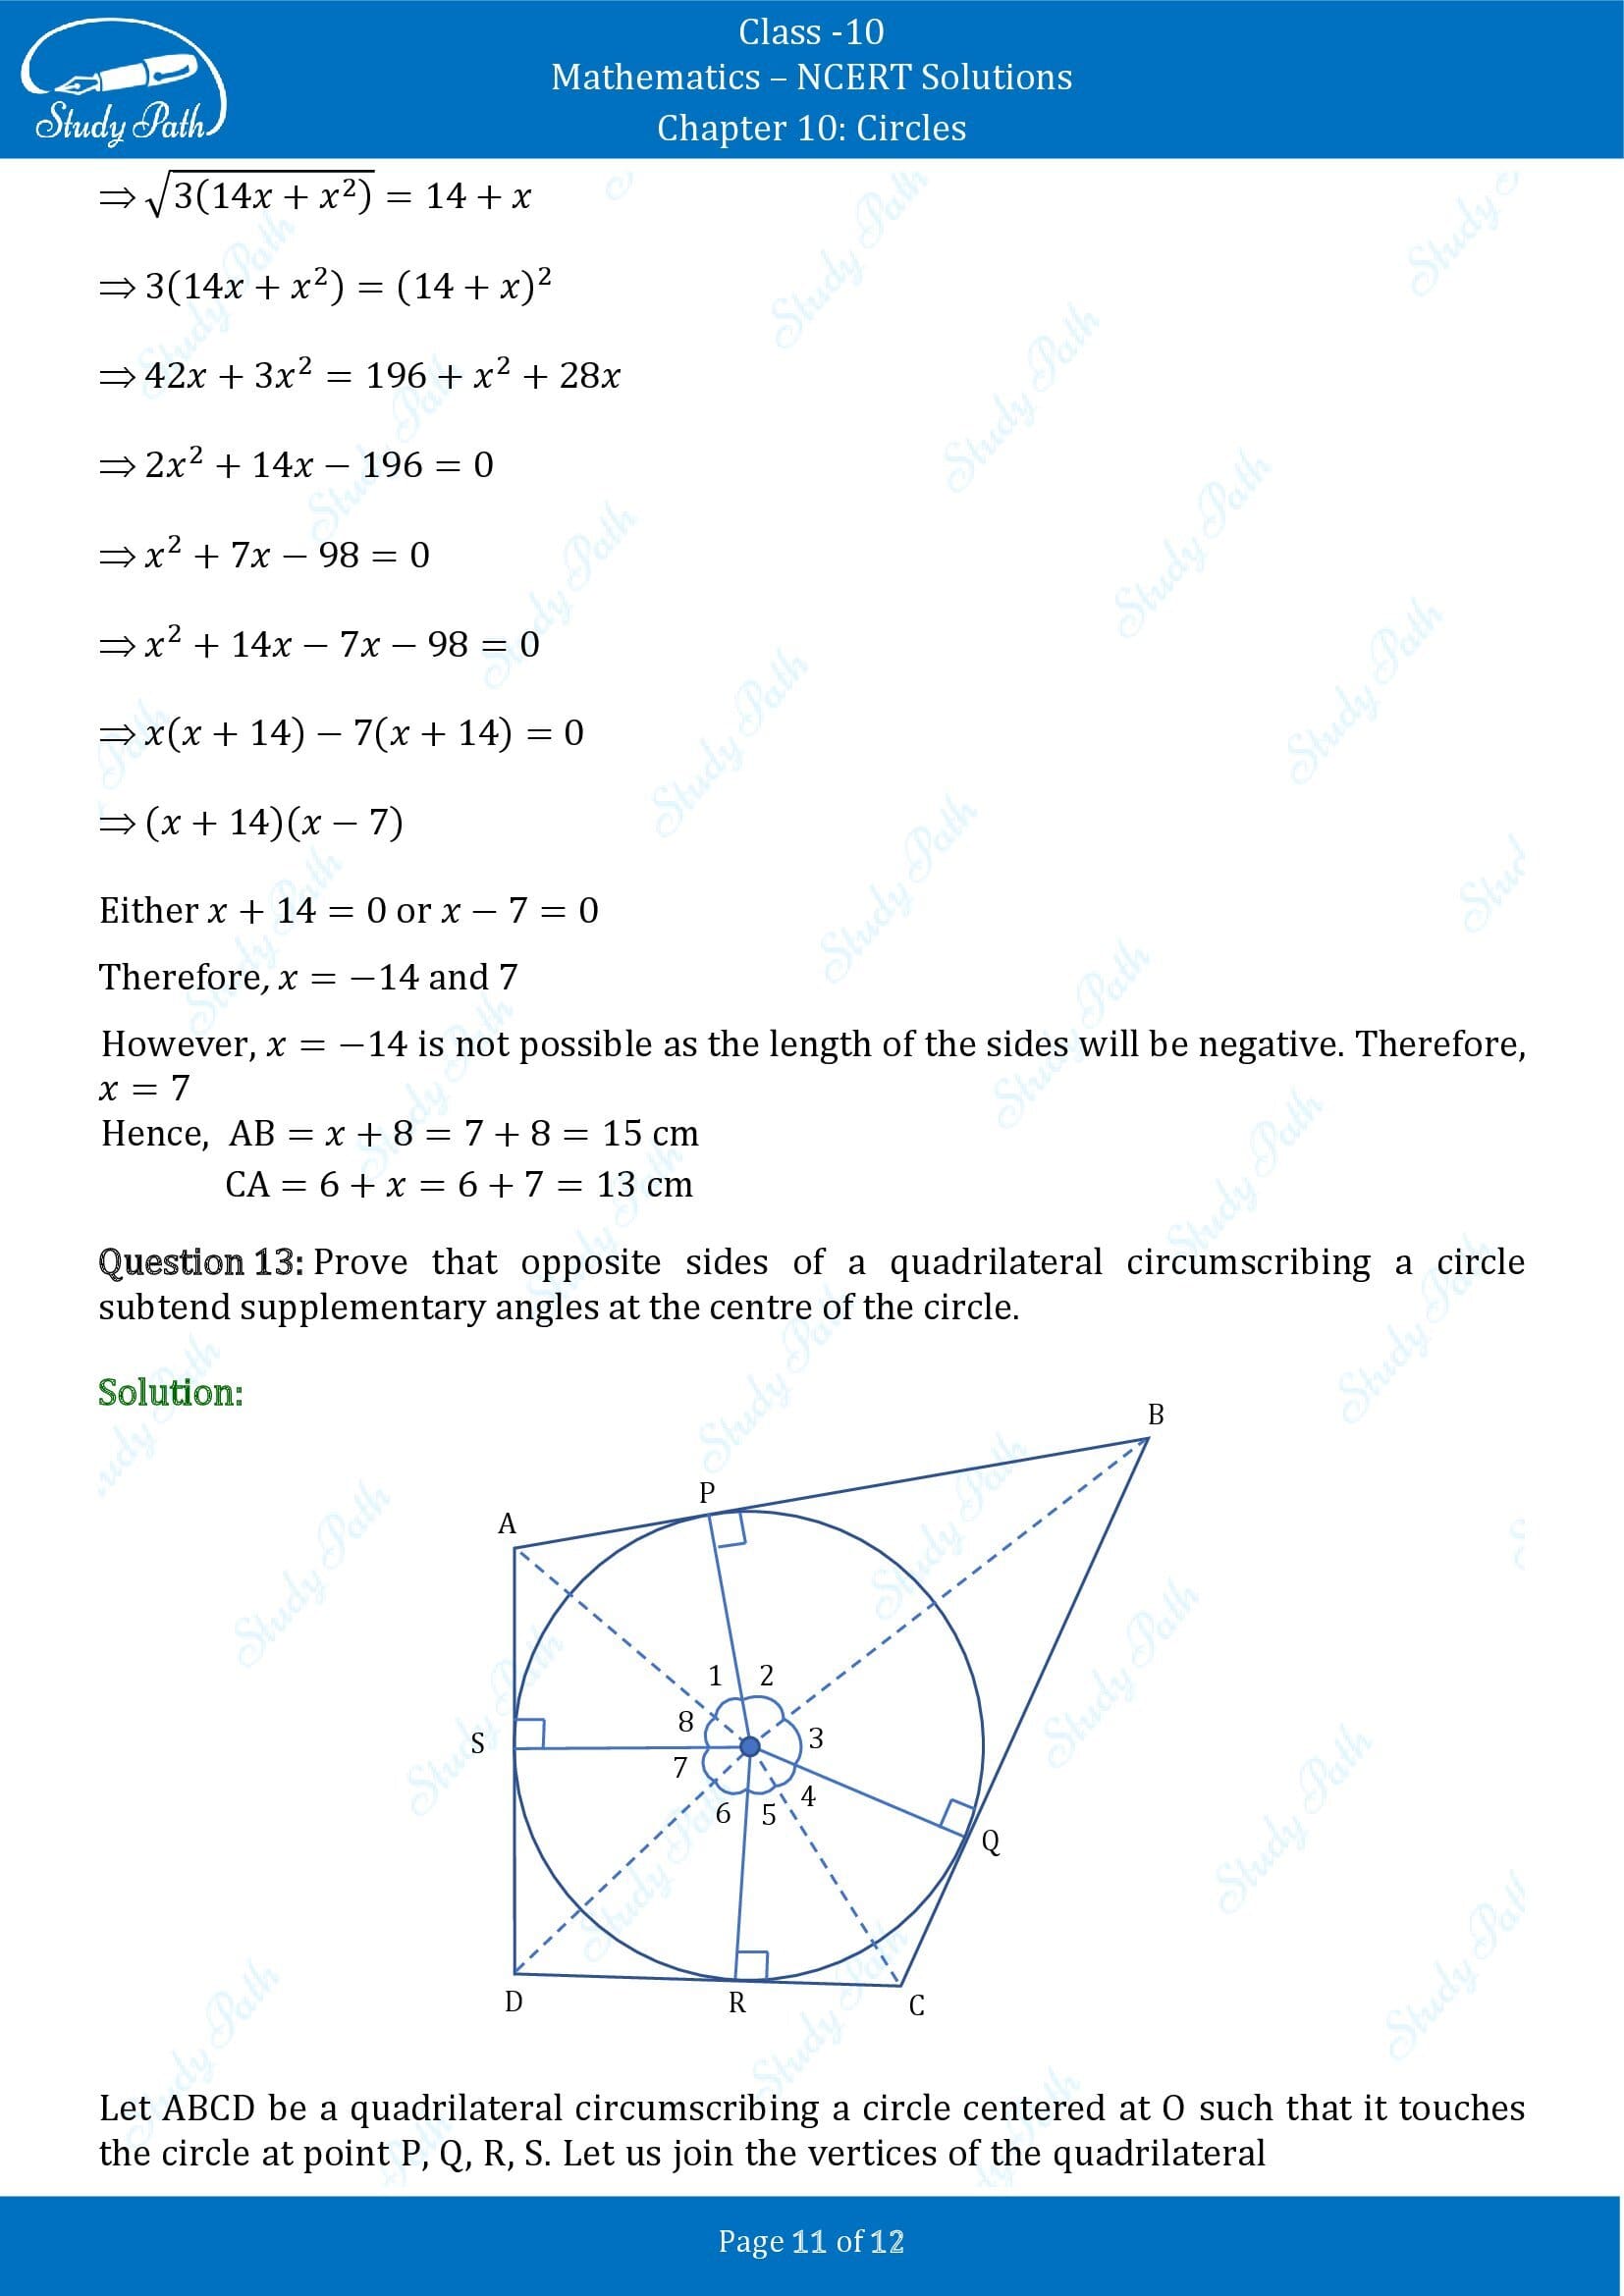 NCERT Solutions for Class 10 Maths Chapter 10 Circles Exercise 10.2 00011